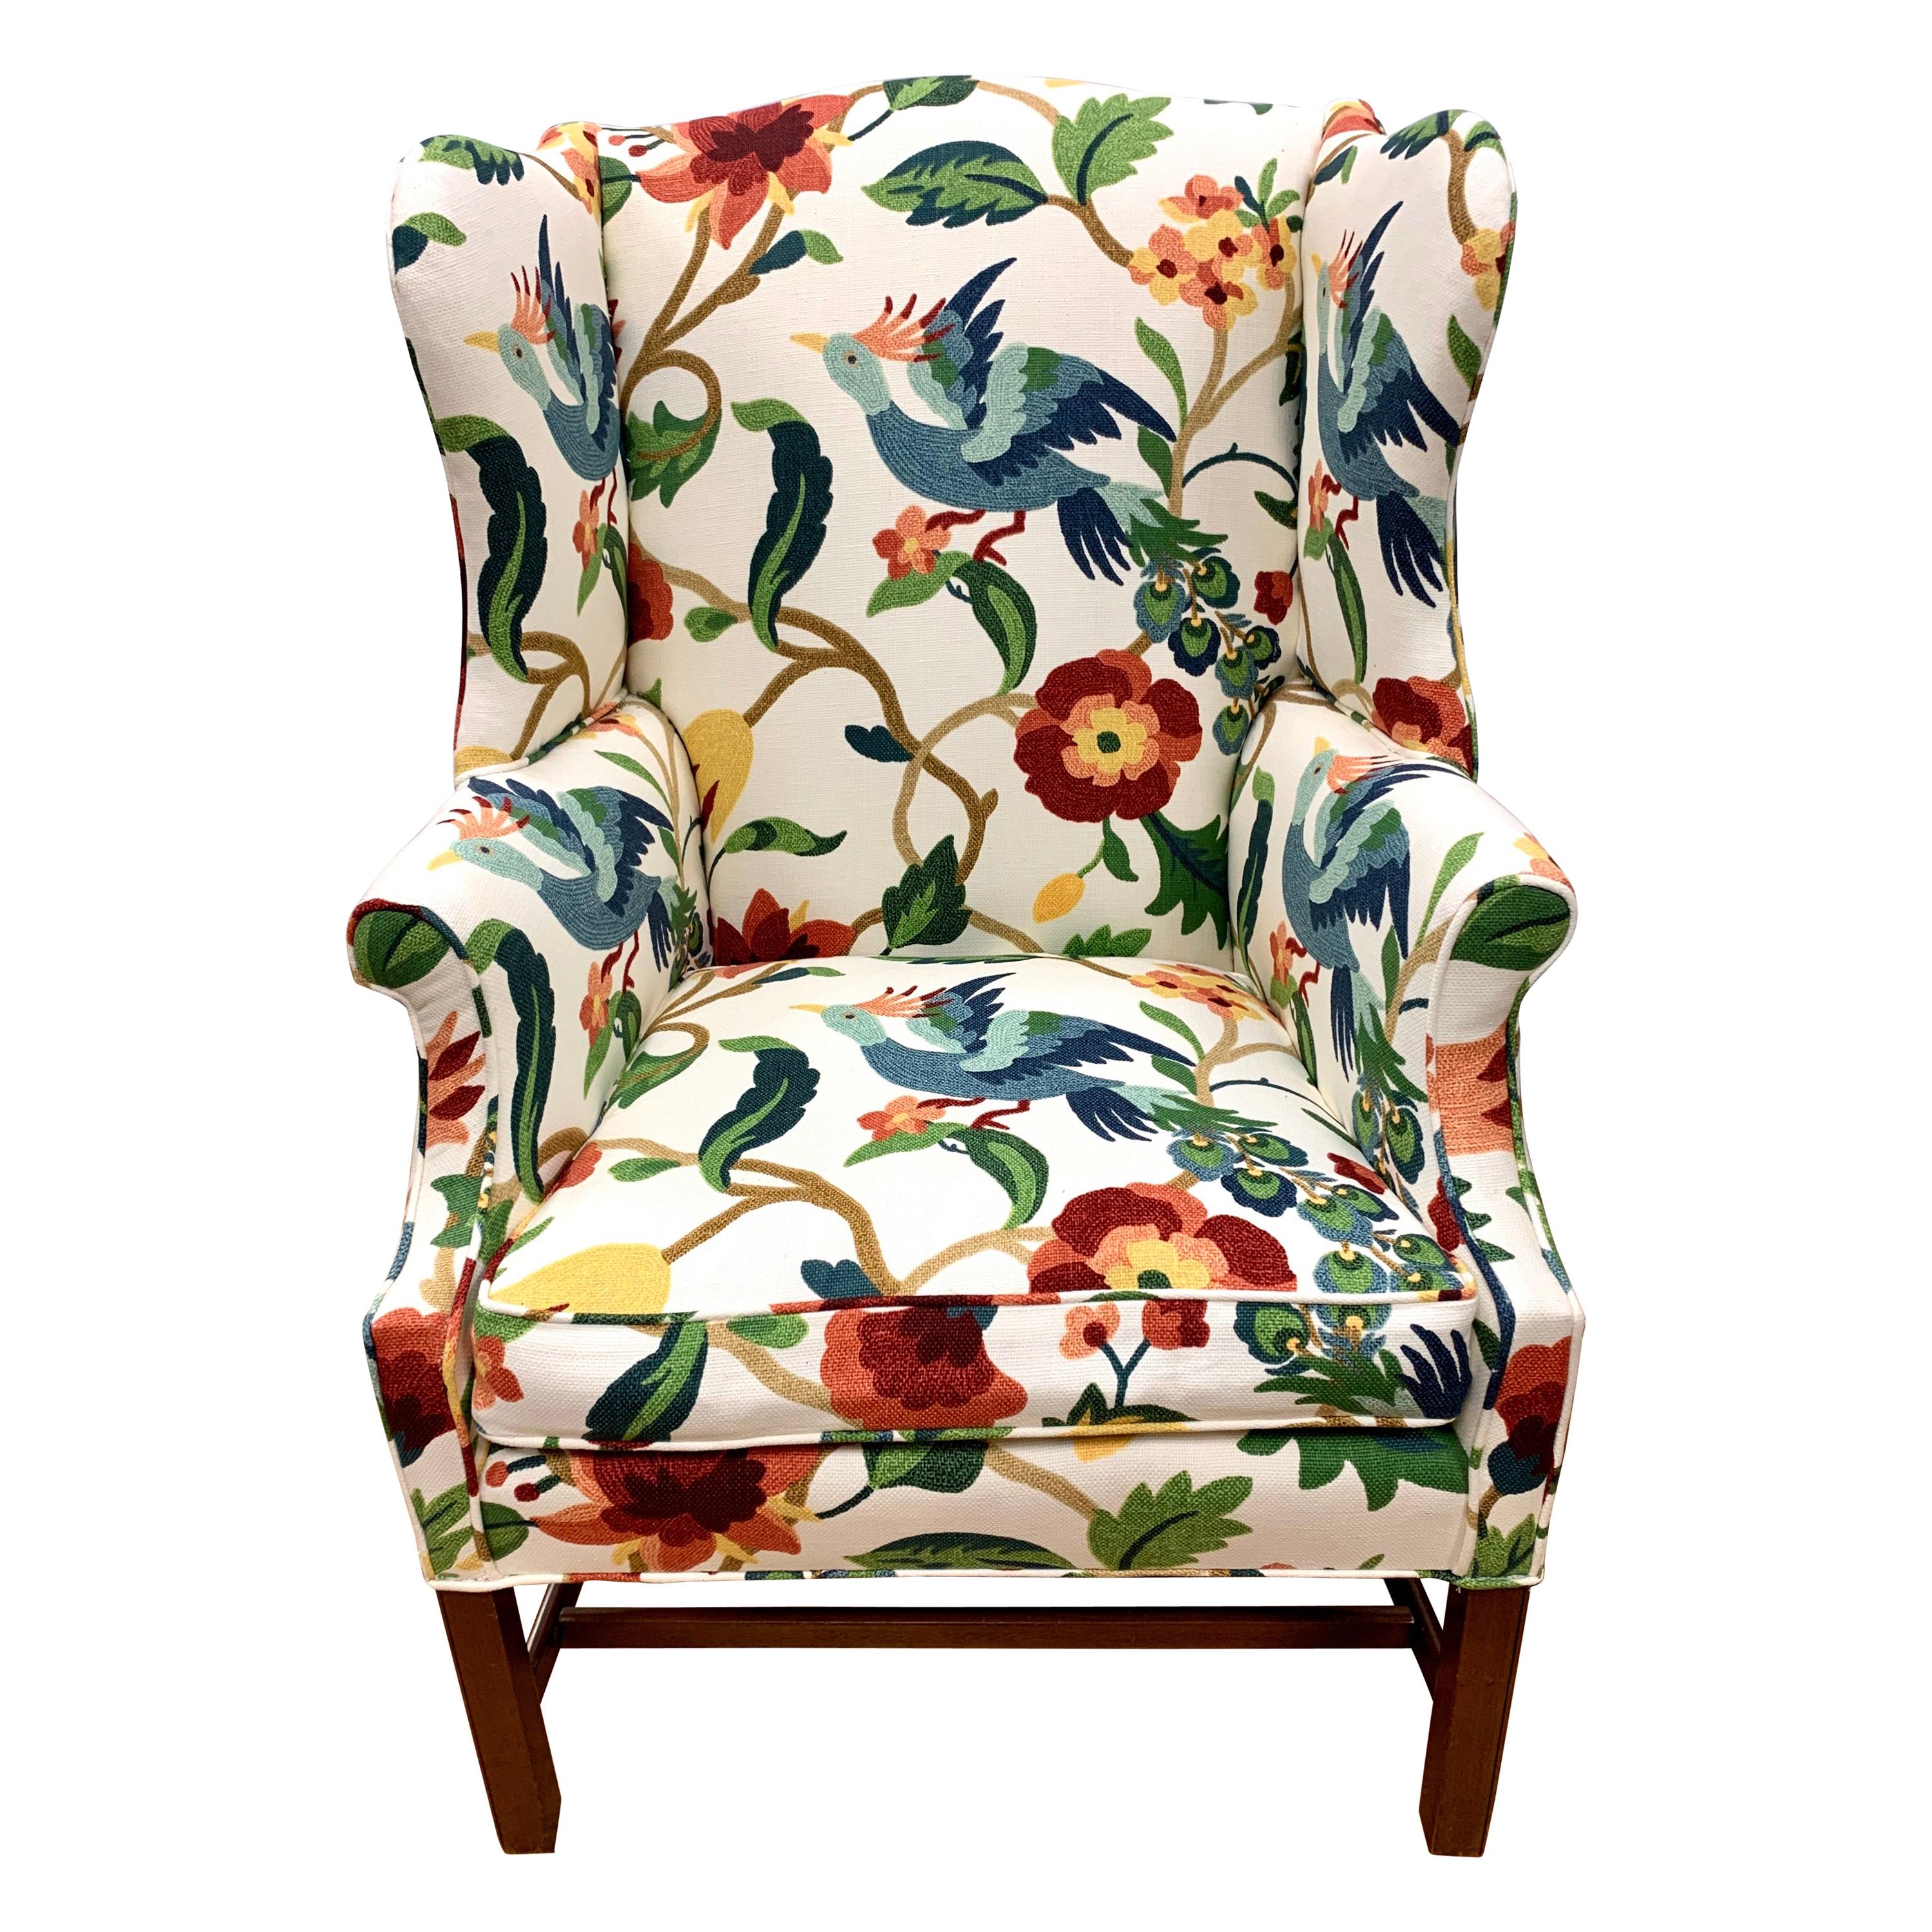 Crewelwork Floral and Bird Print Upholstered Mahogany Wingback Chair